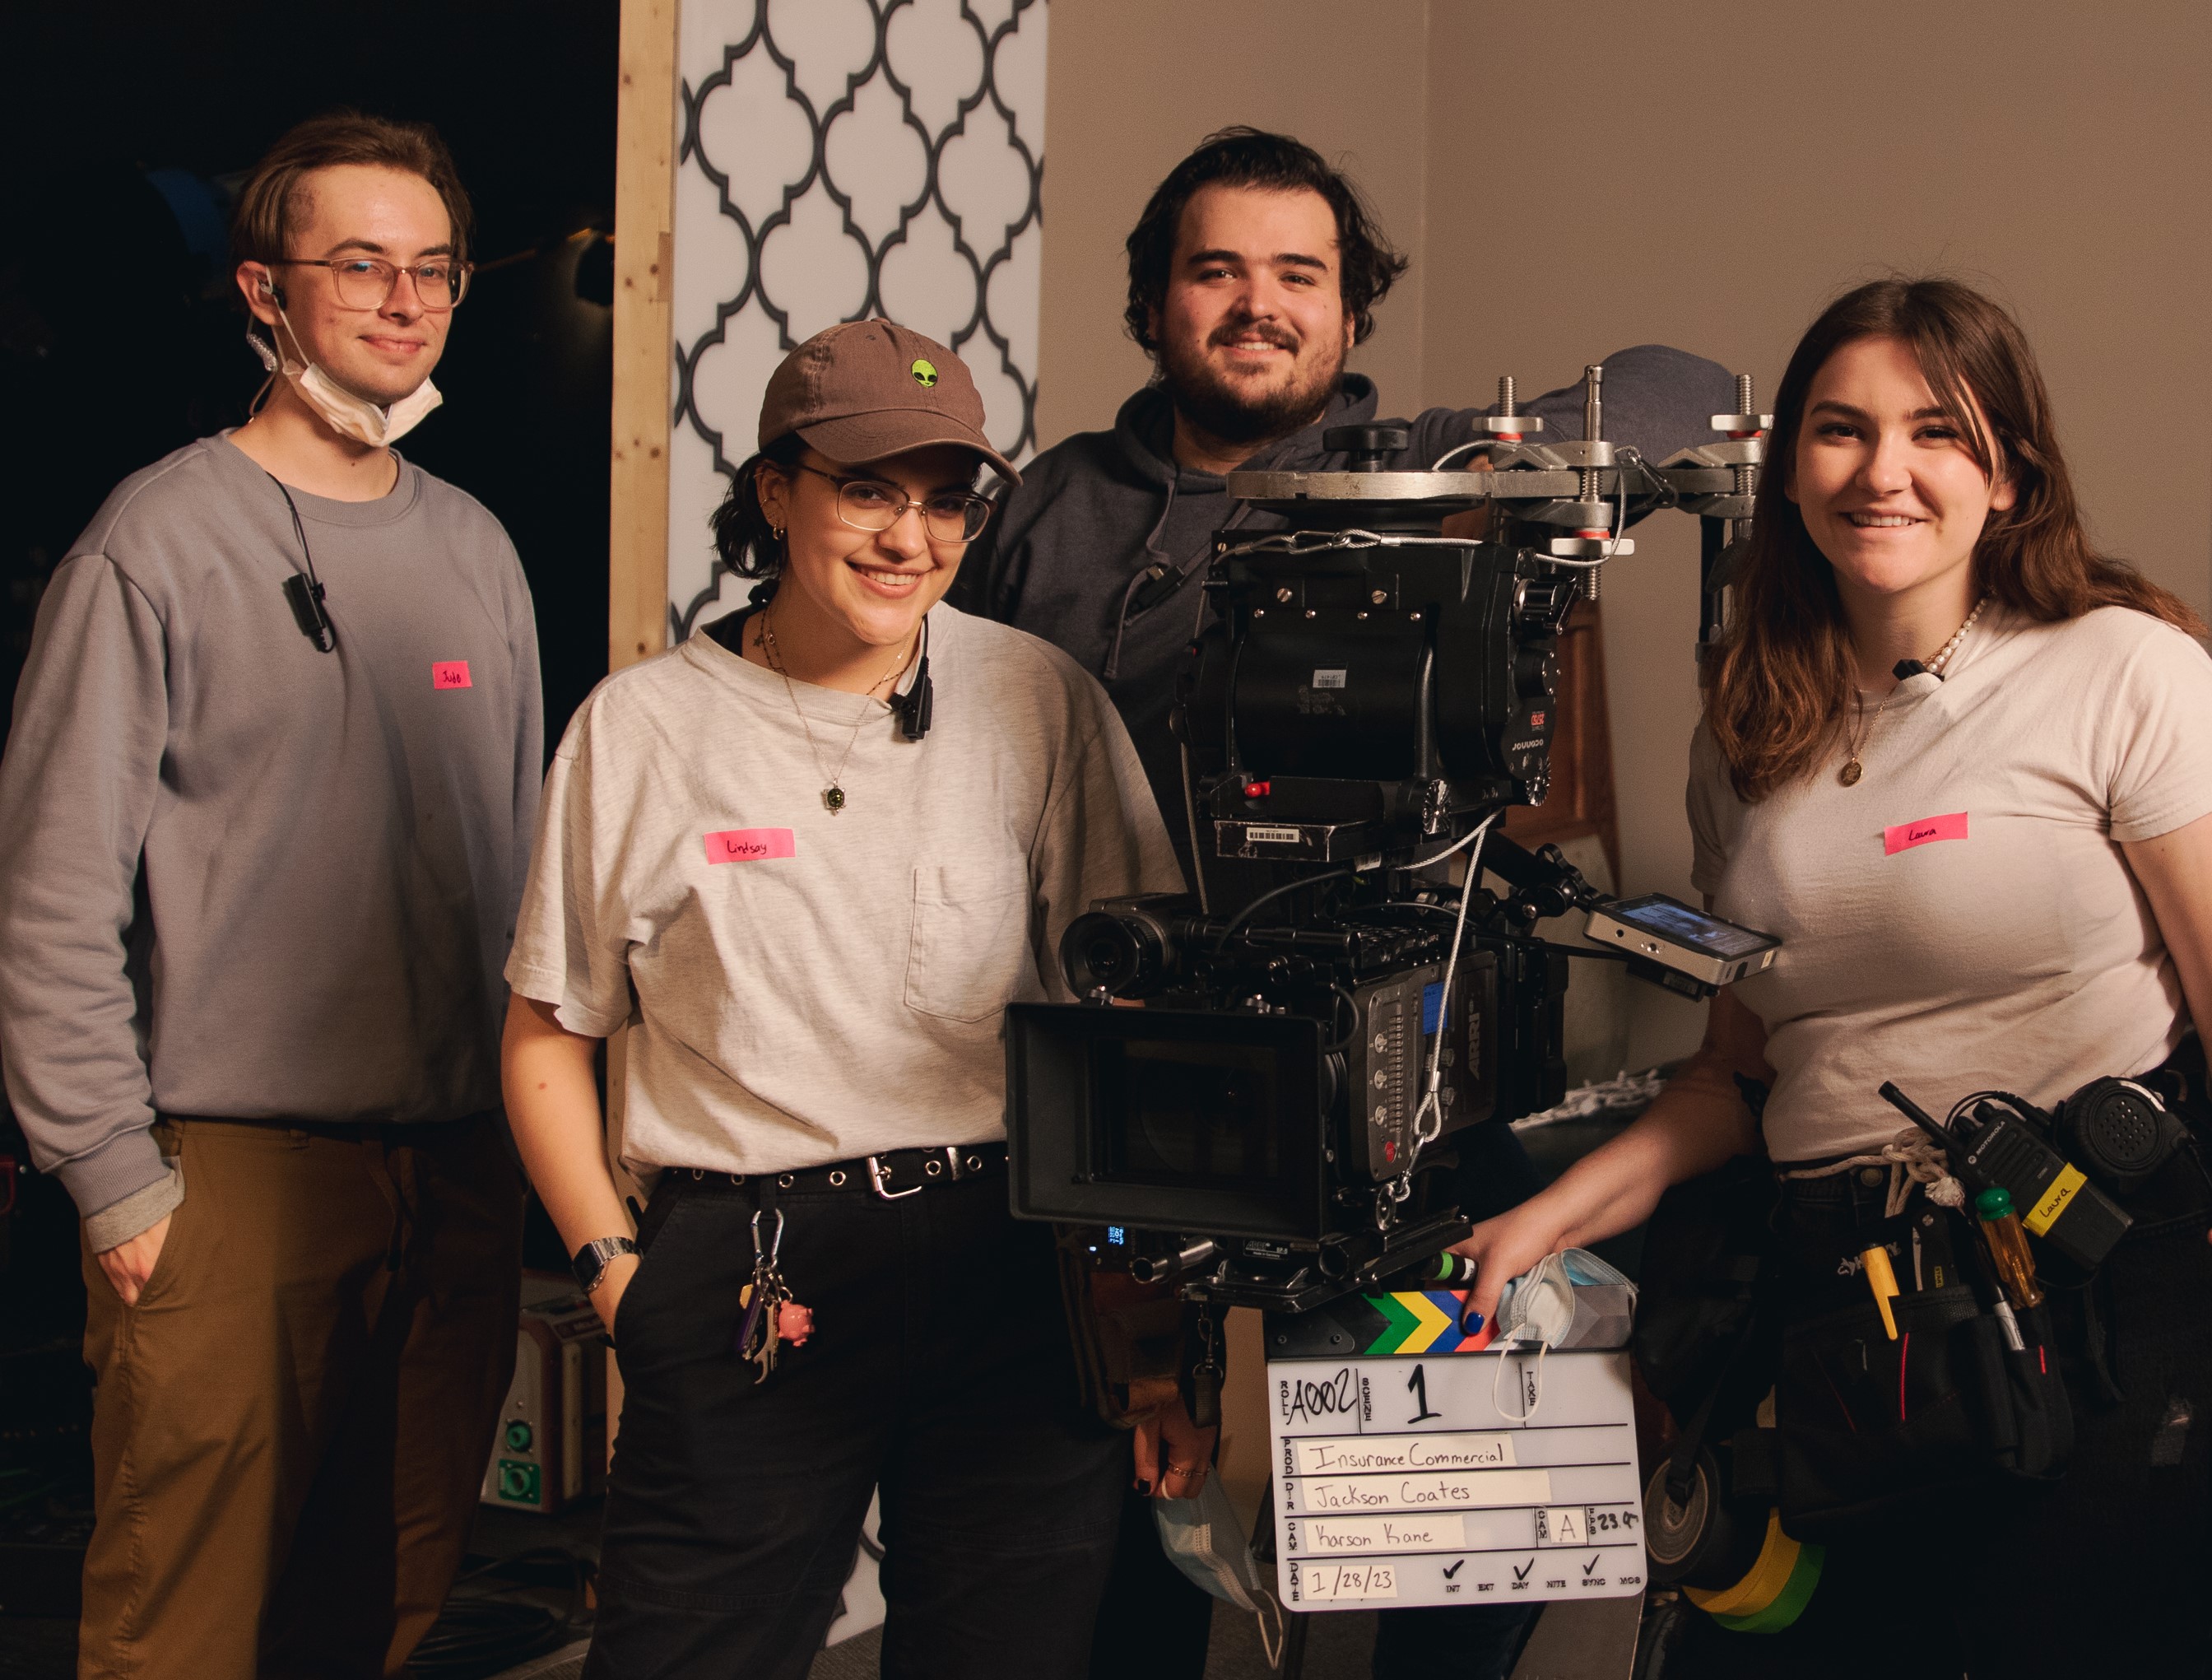 School of Cinematic Arts Students on set with a camera smiling